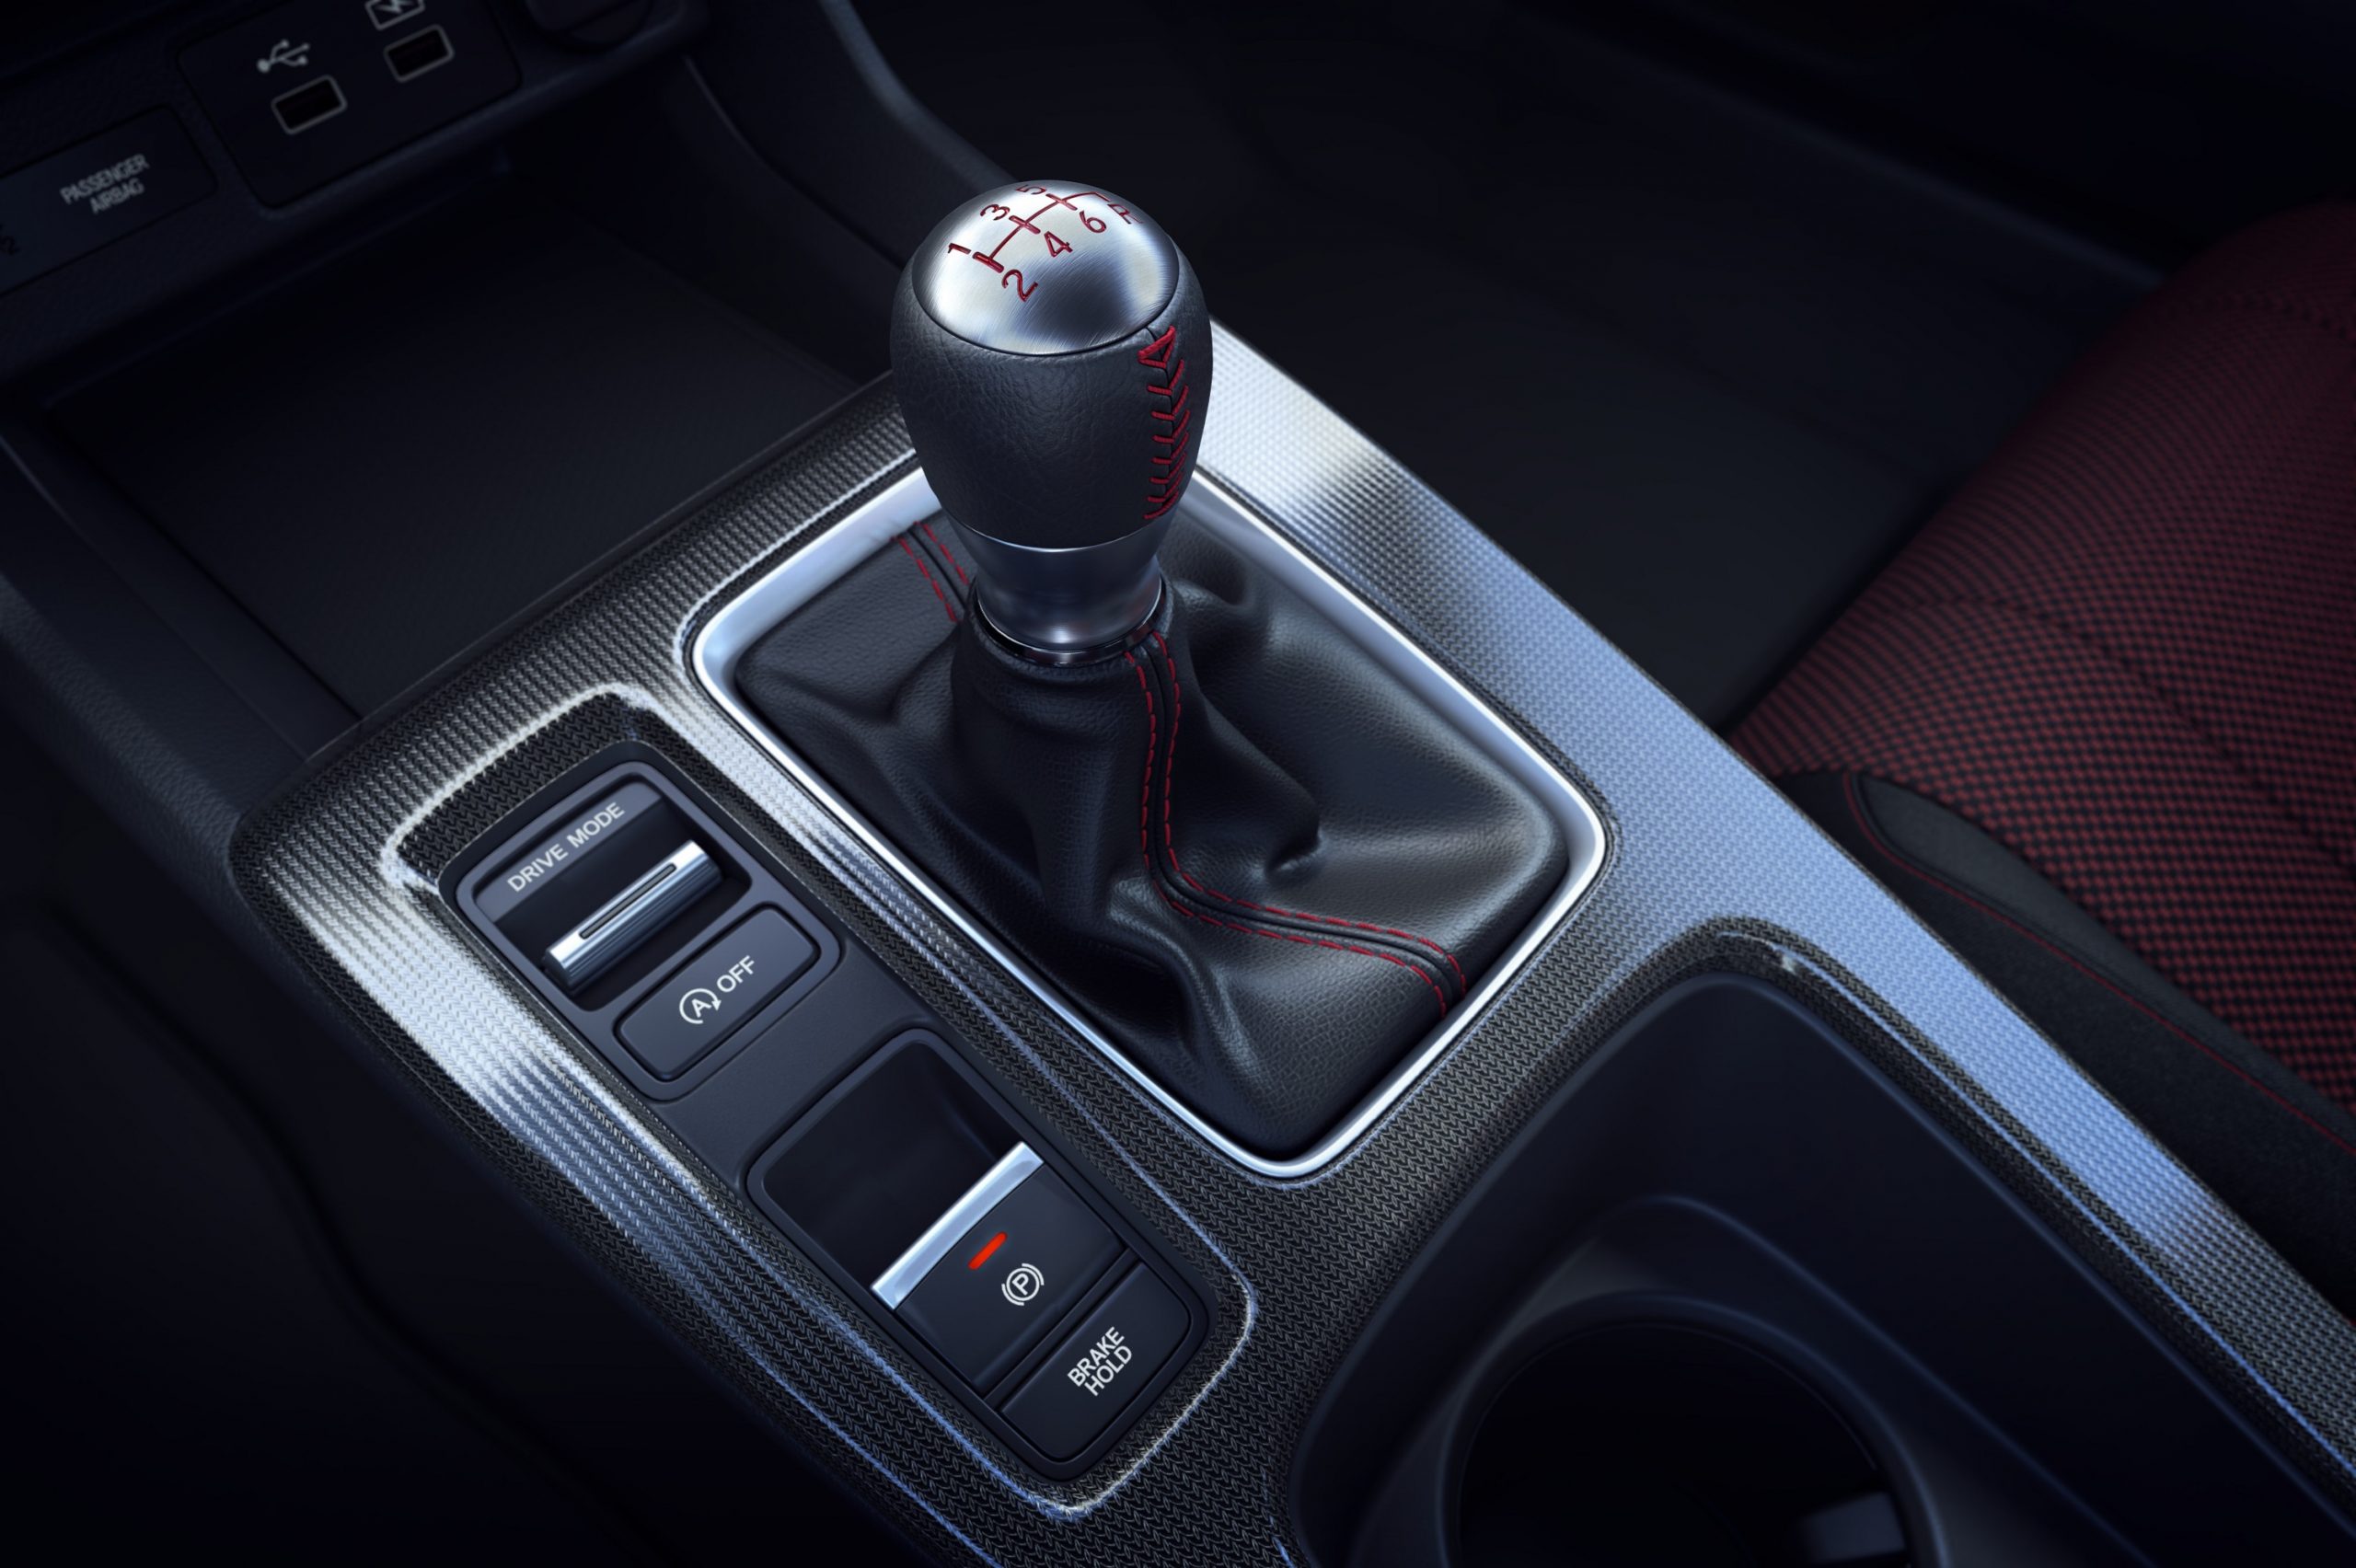 The manual transmission in the new Honda Civic Si